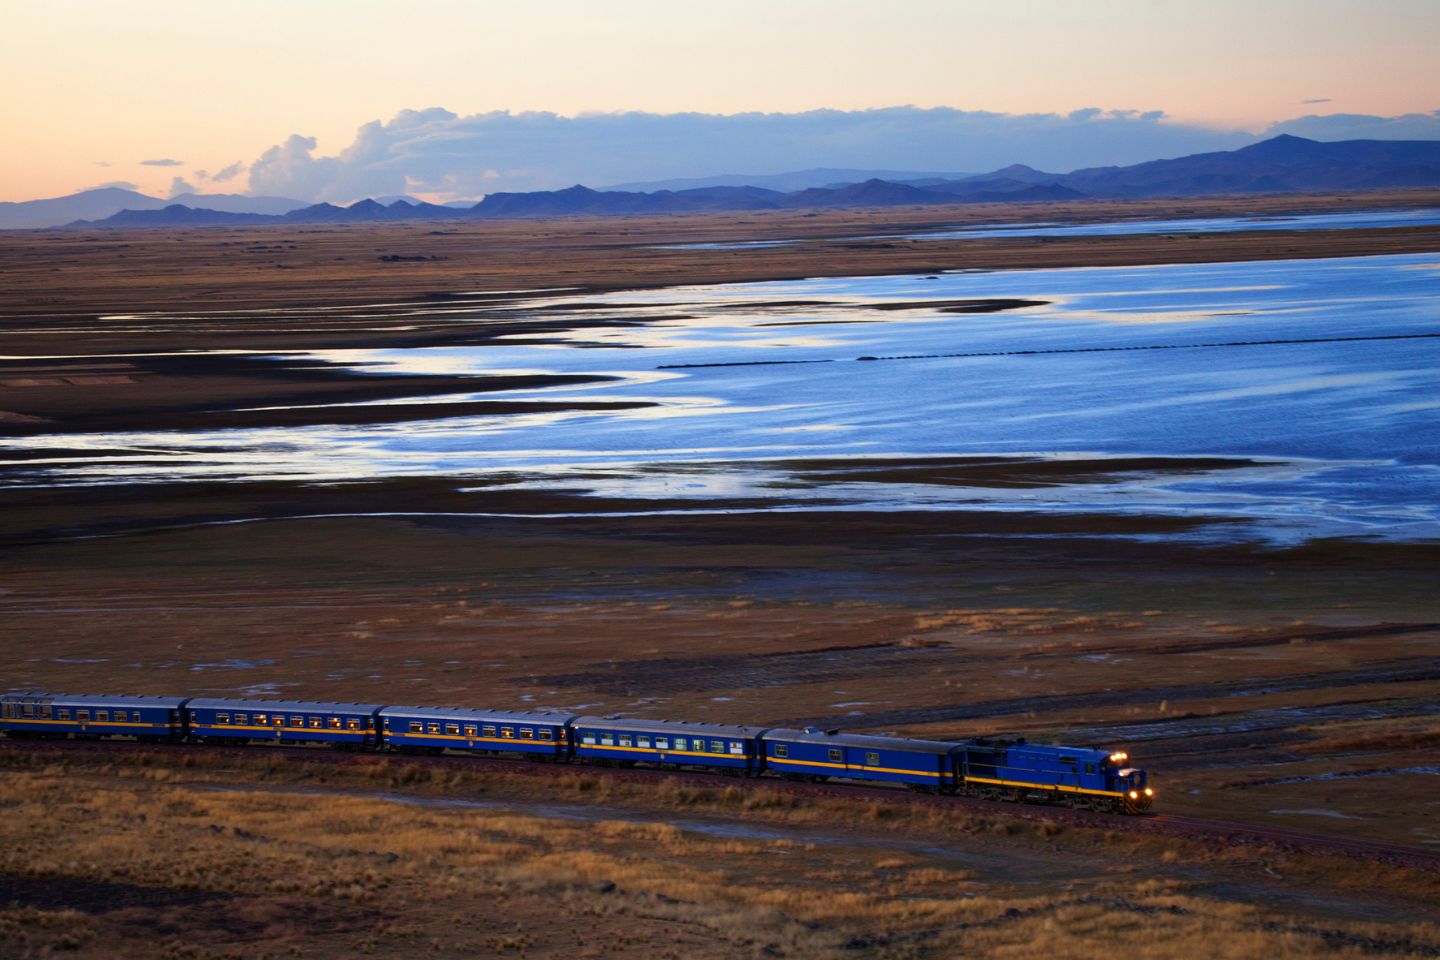 The Most Unforgettable Train Journeys Through South America